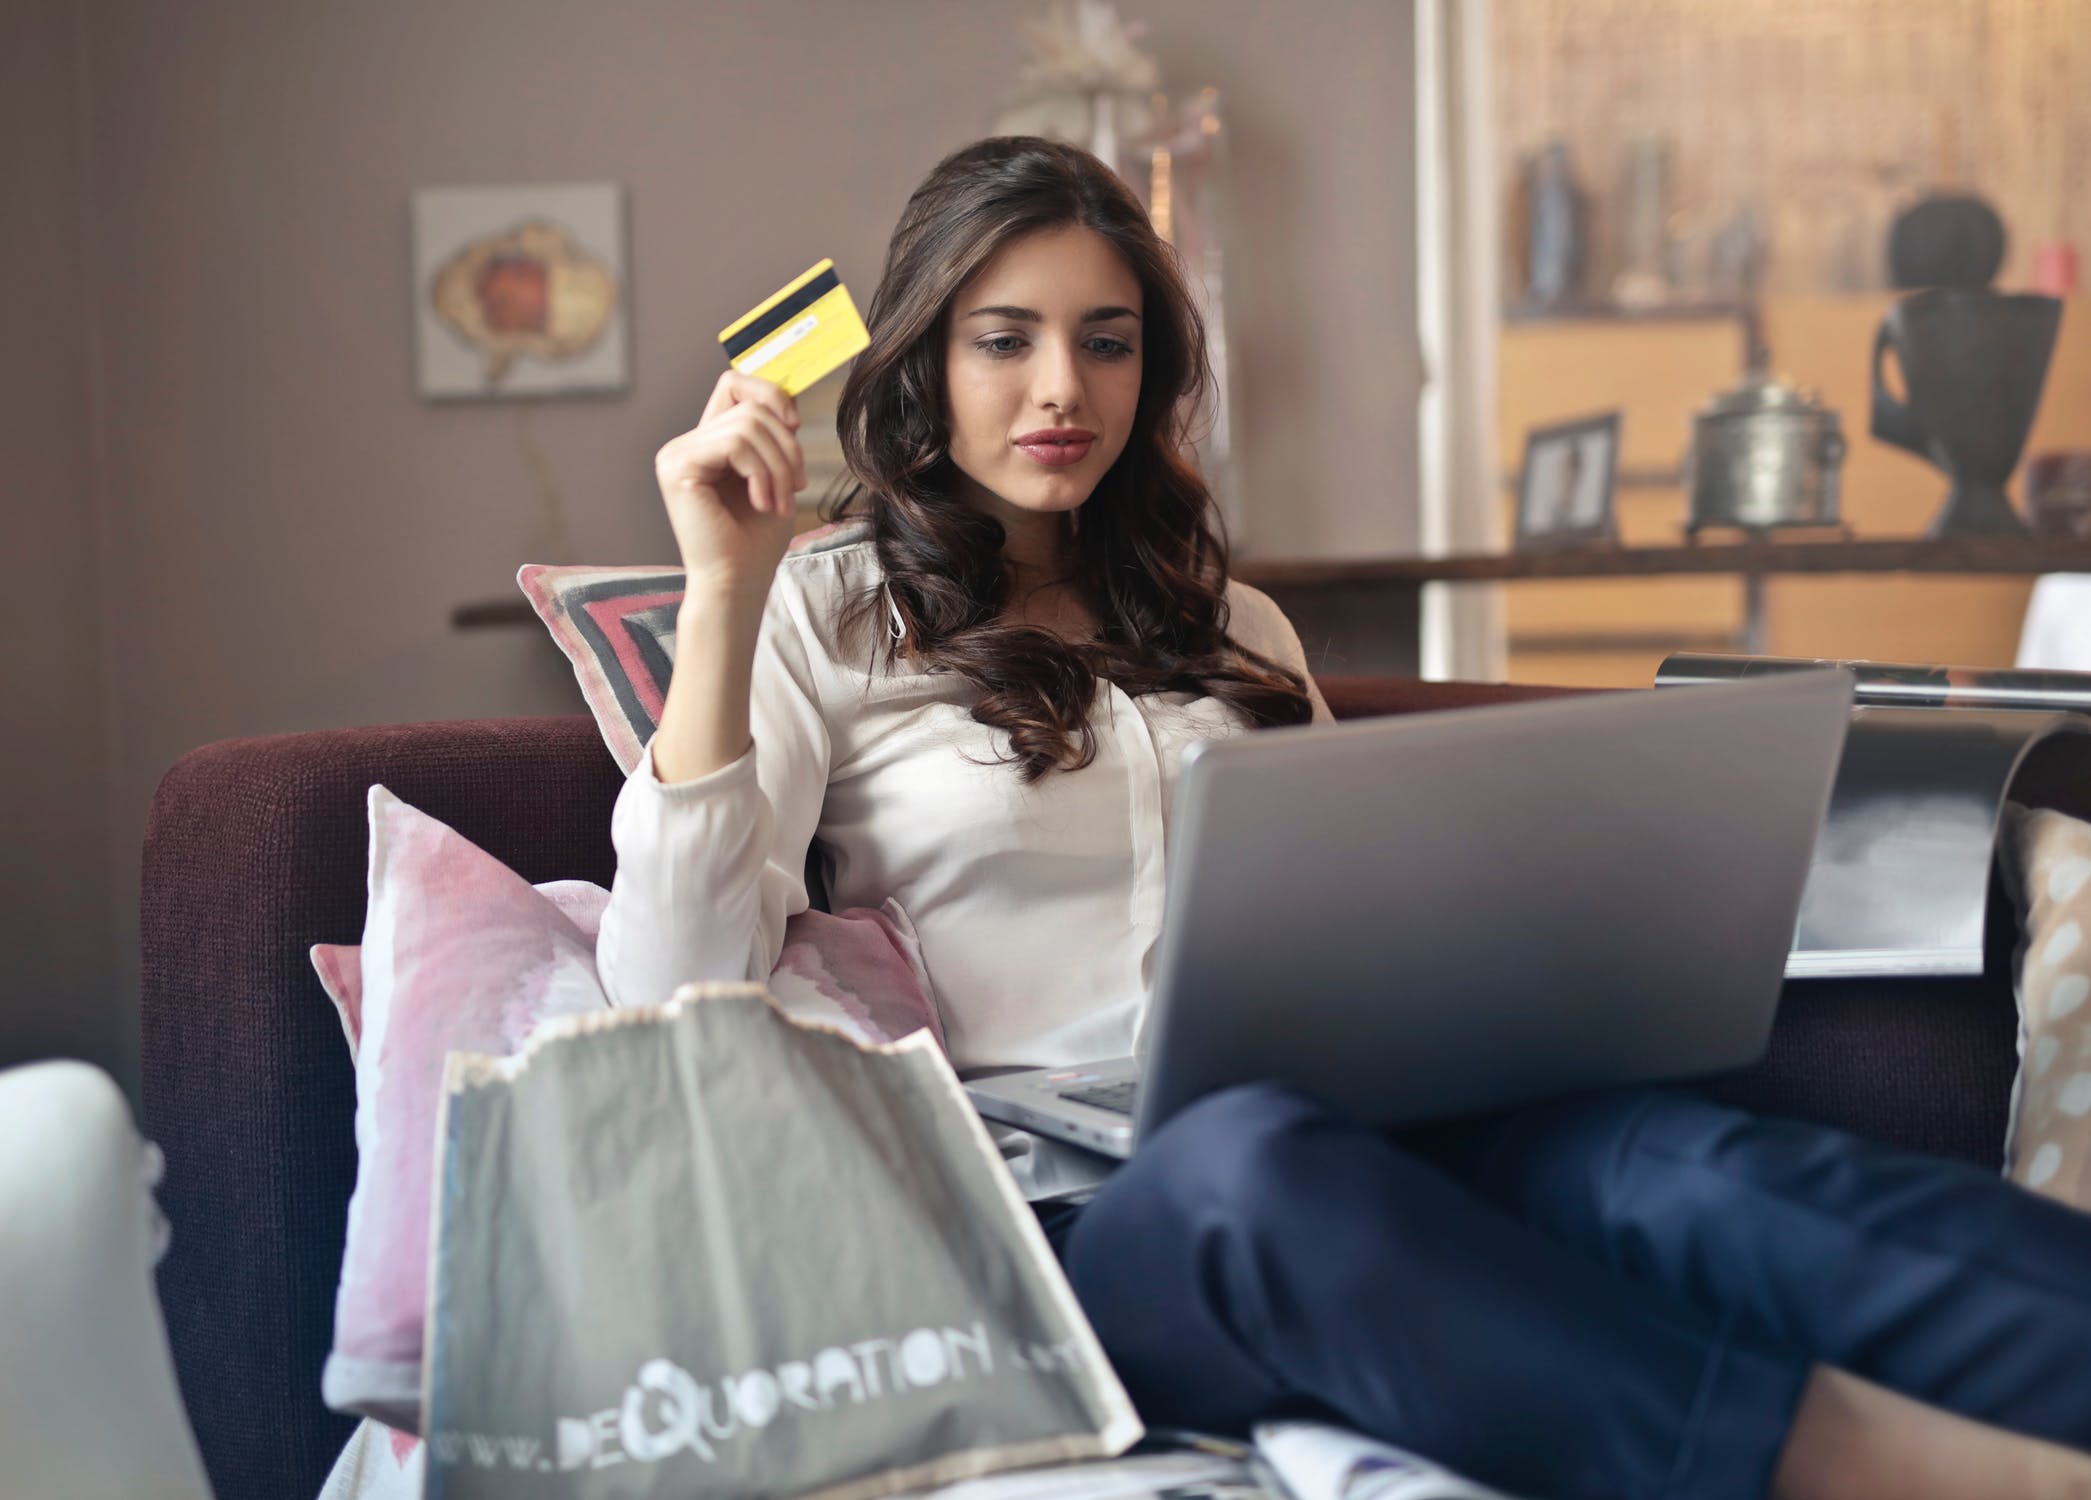 How To Save Money While Shopping Online